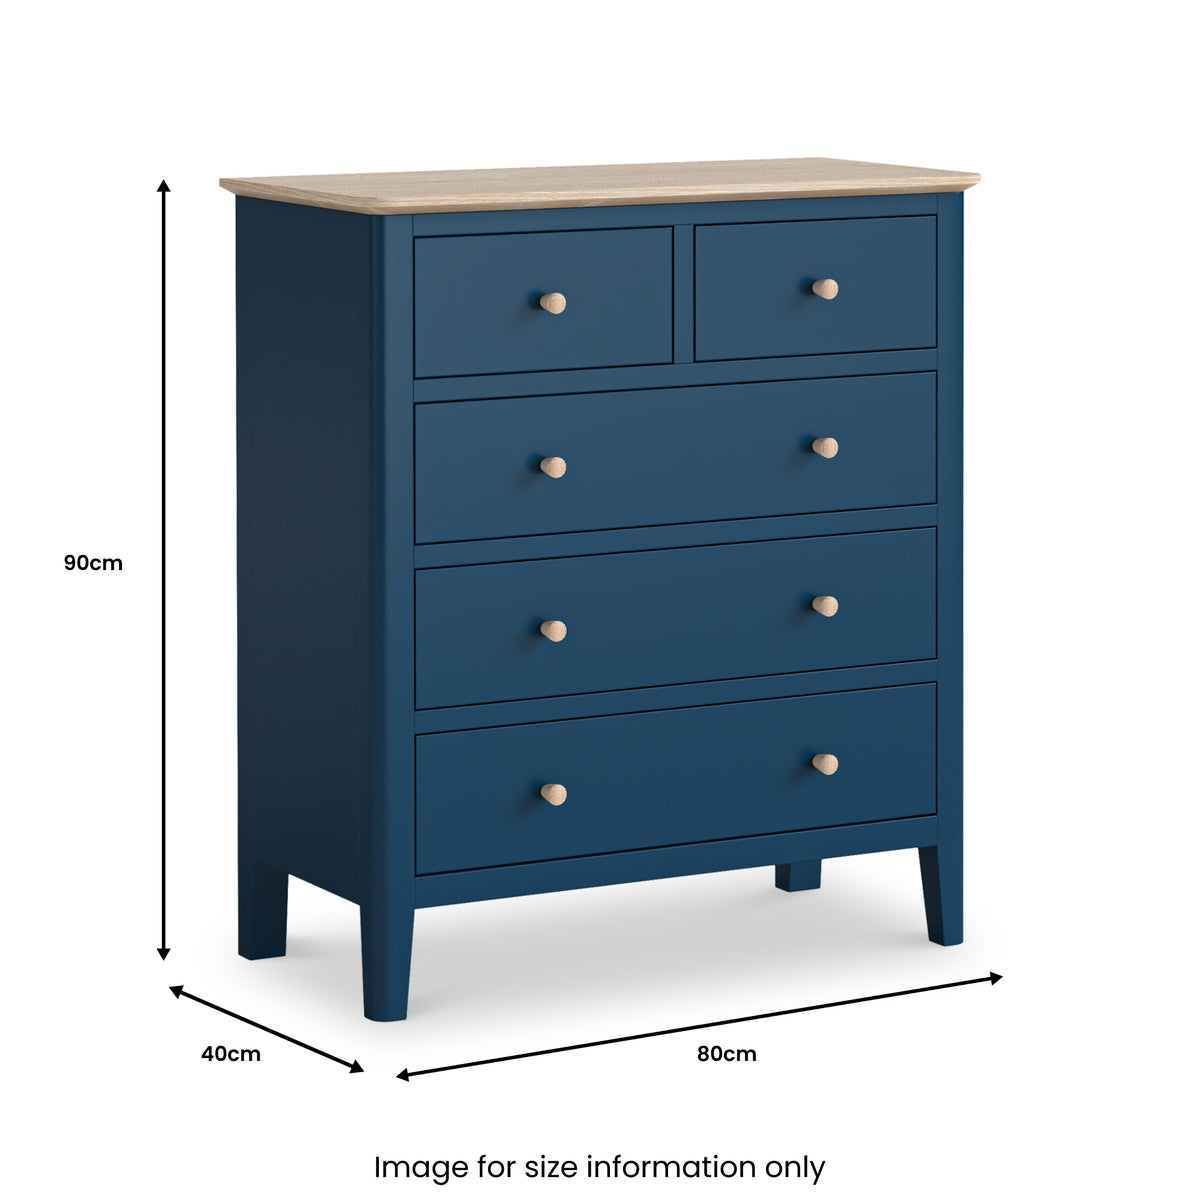 Penrose 2 over 3 chest of drawers dimensions